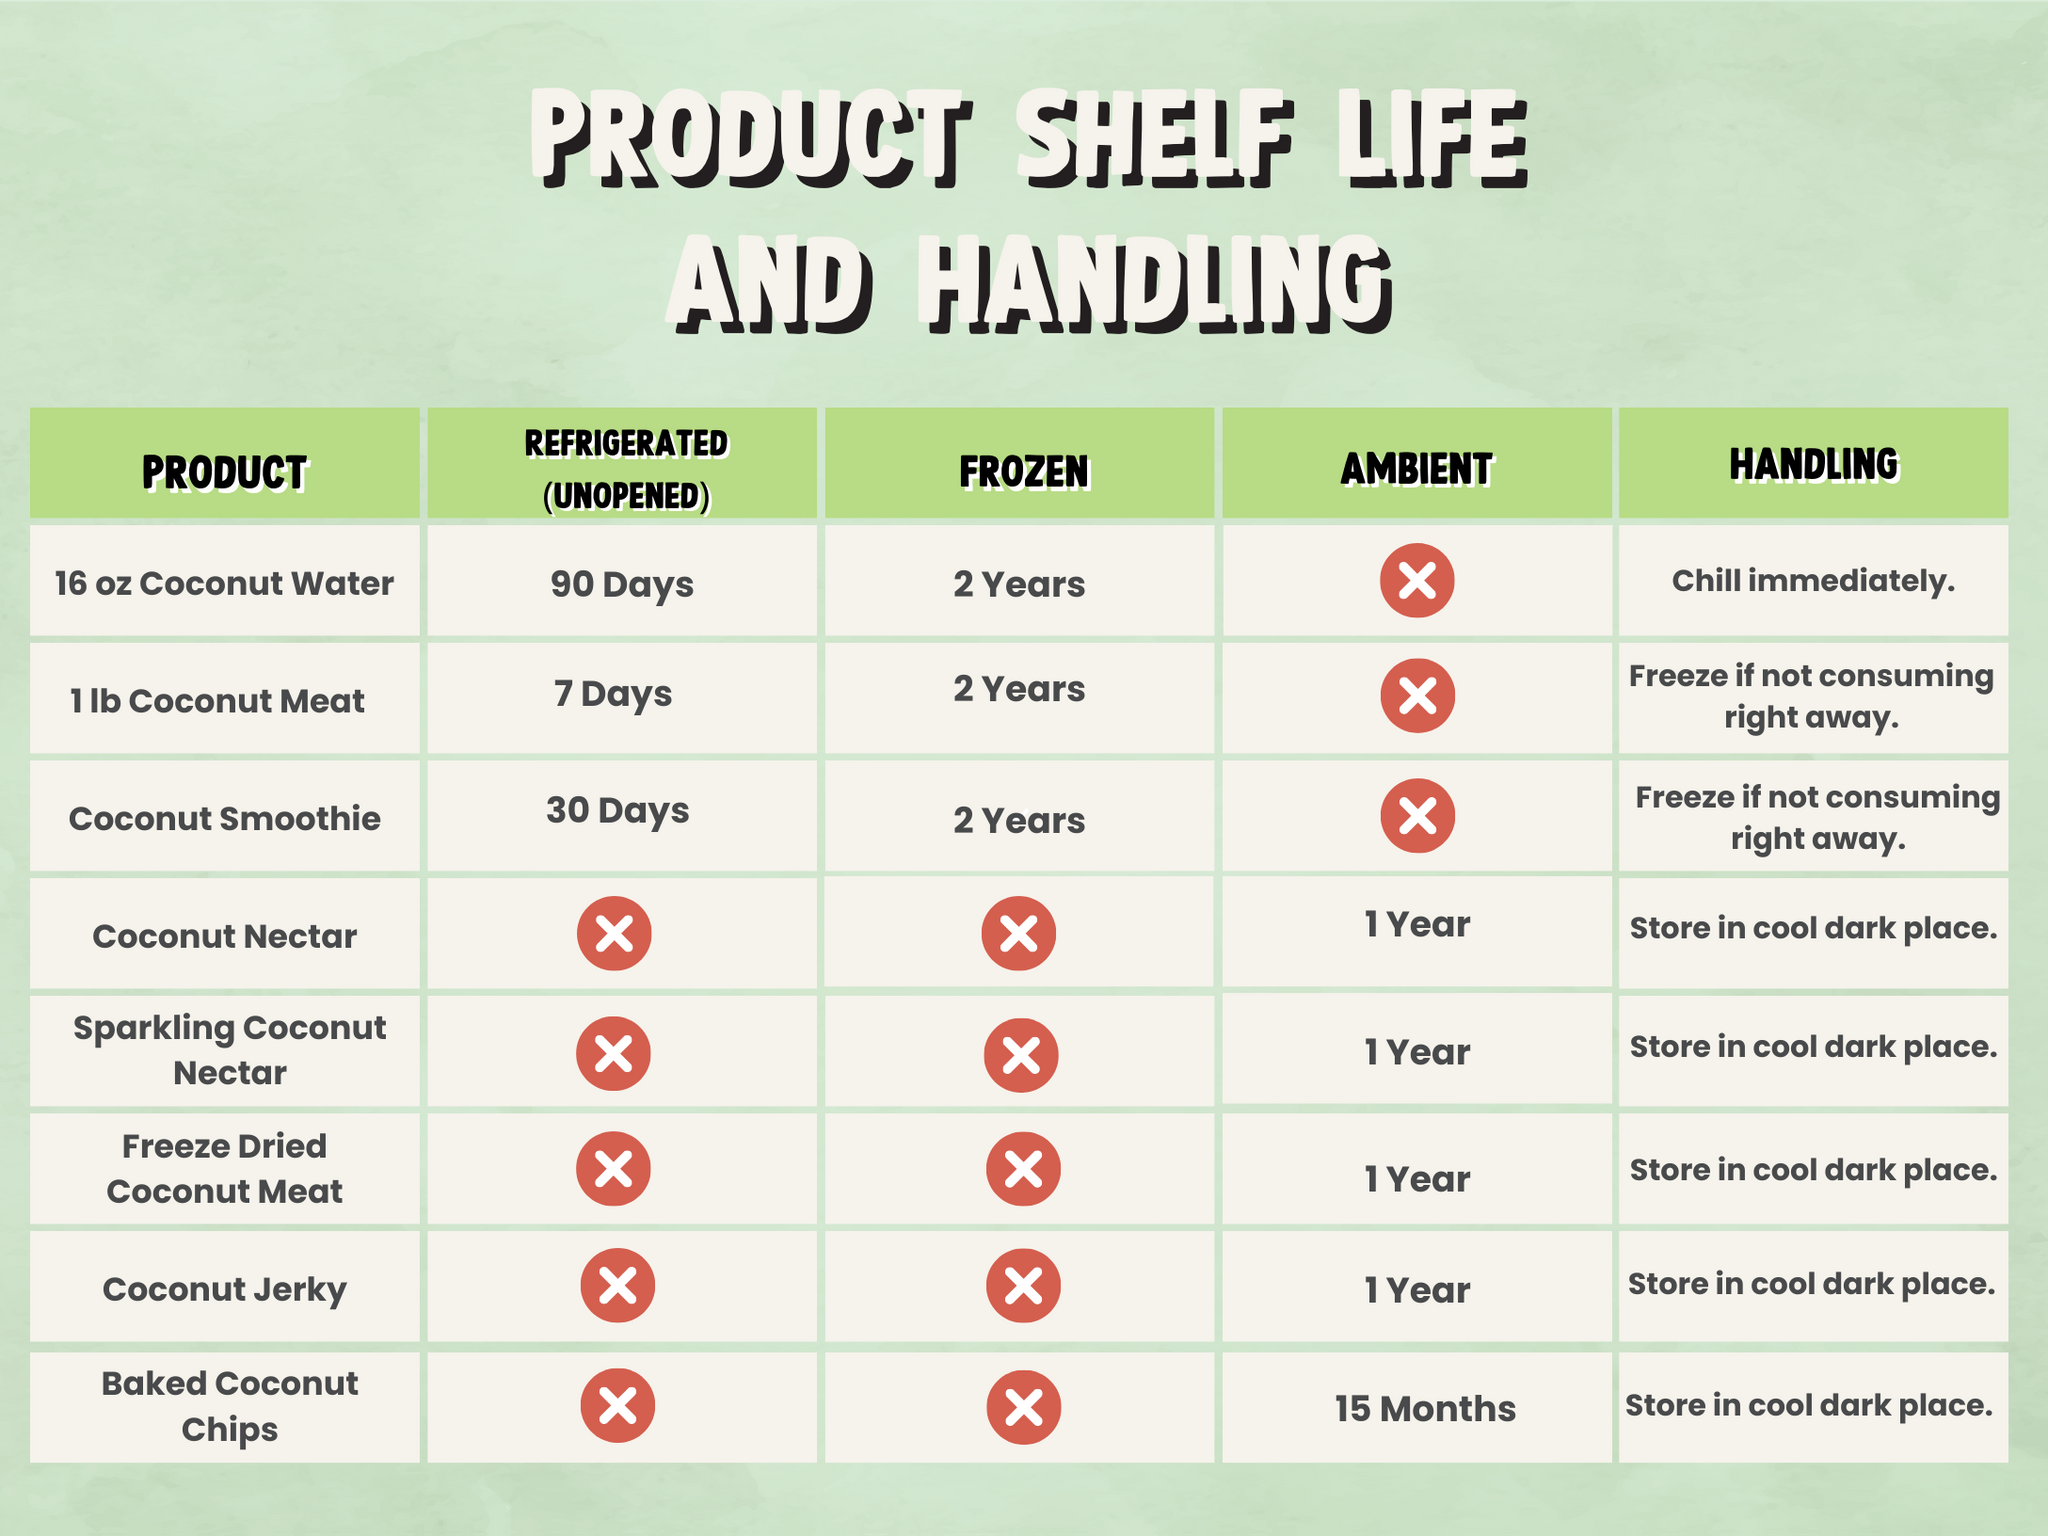 Copra Coconuts Product Shelf Life and Handling